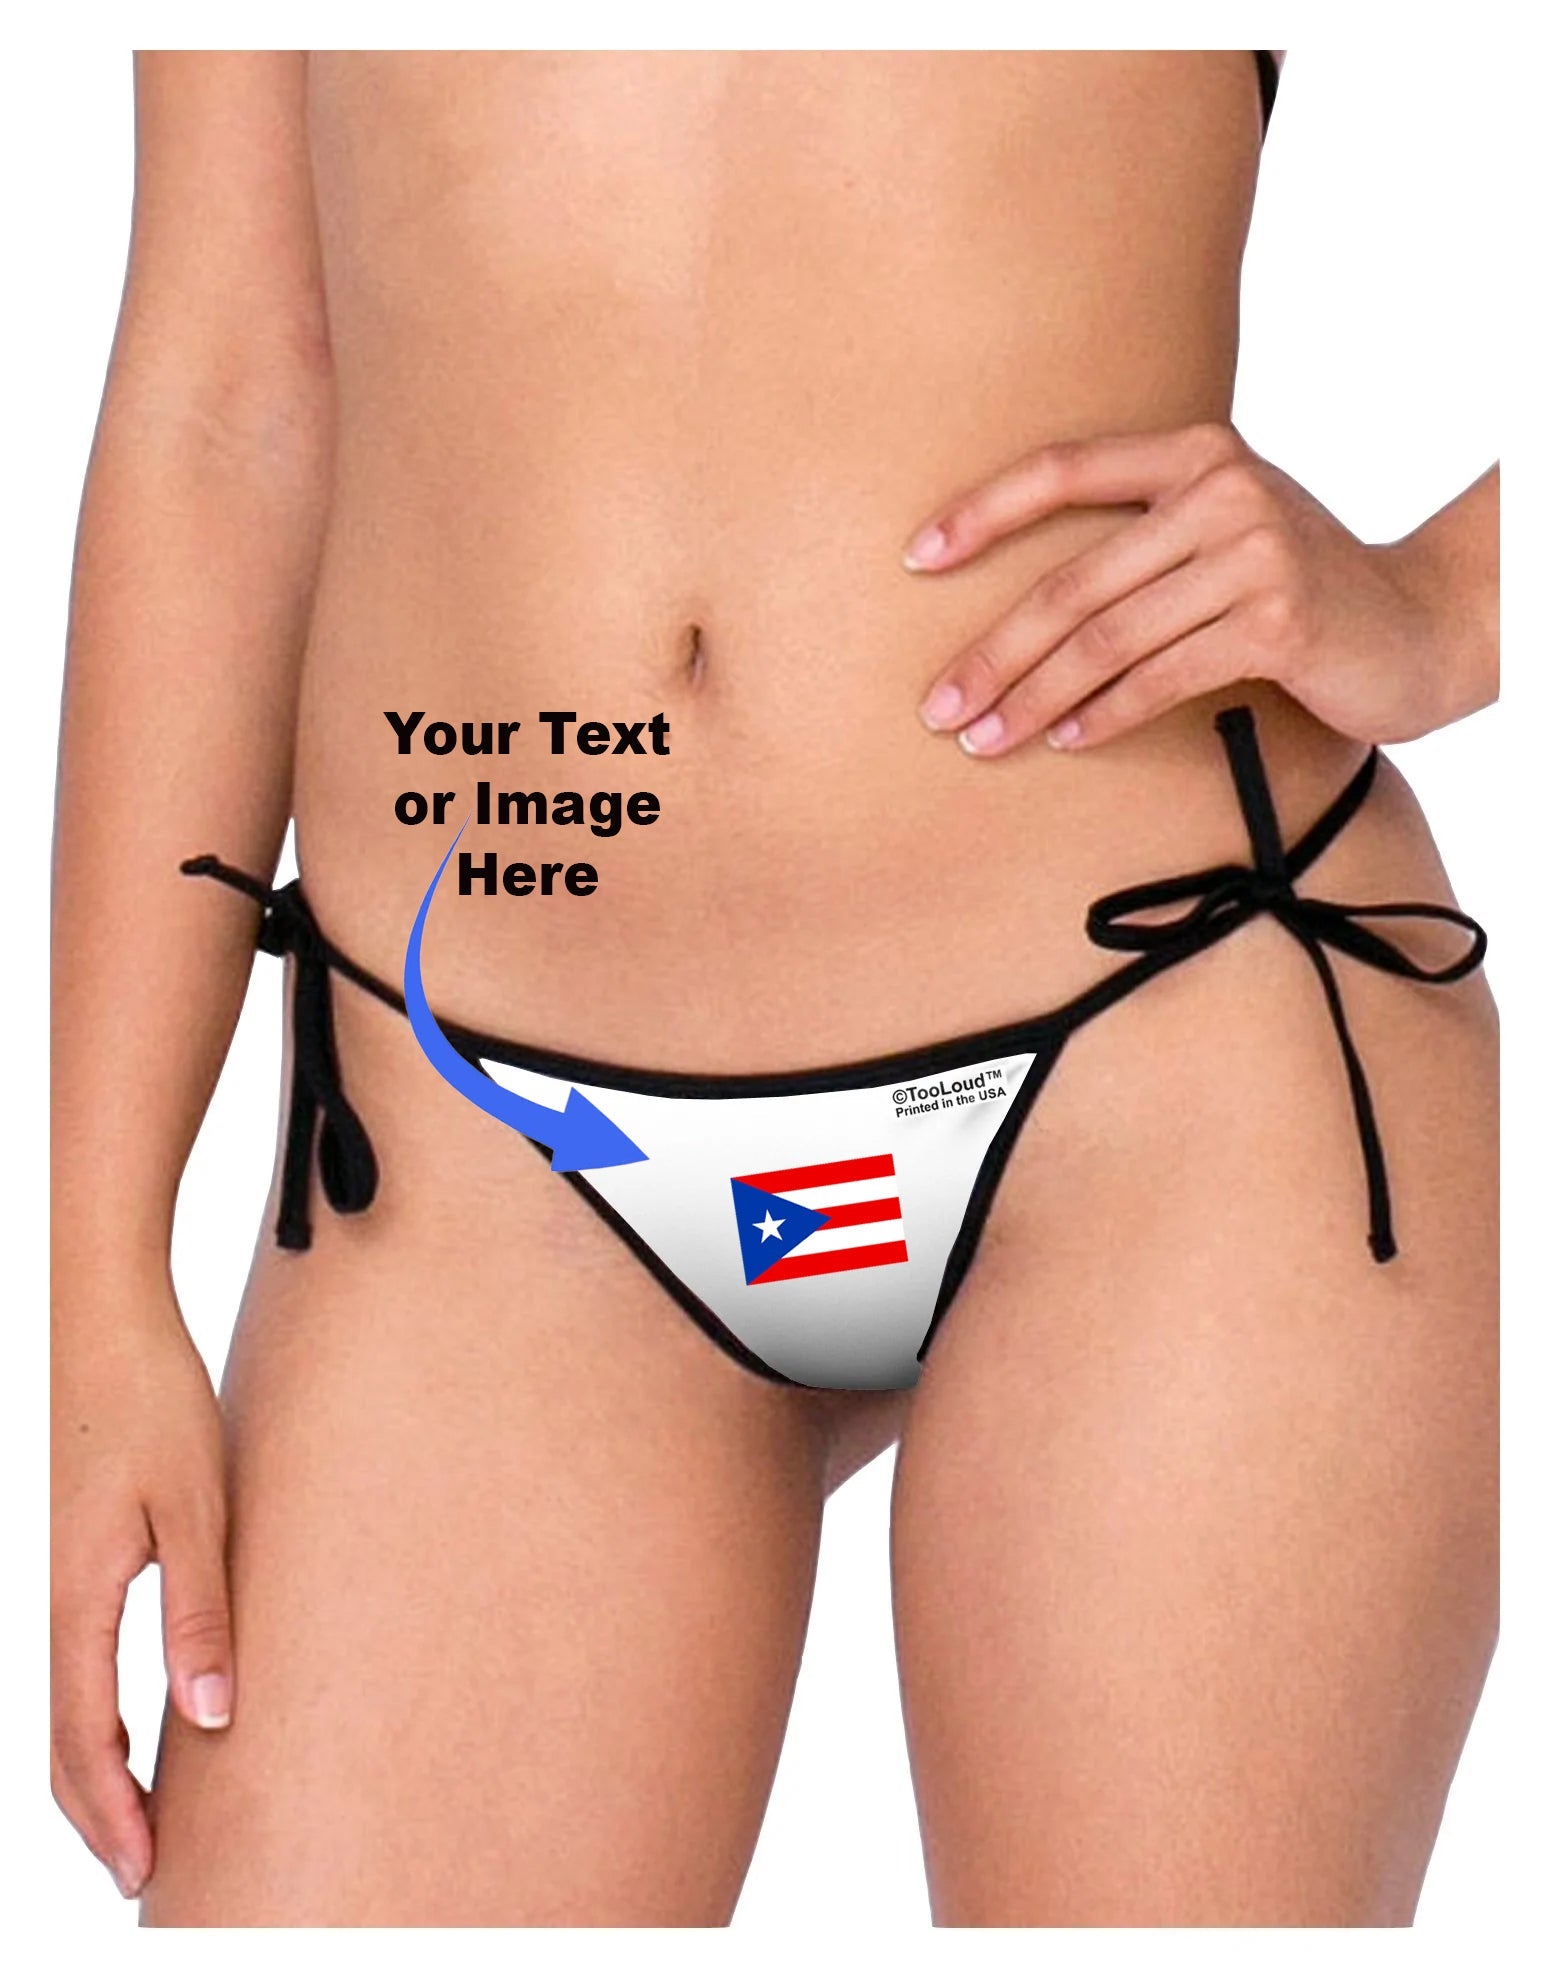 Personalized Underware Photo Thong Panties With Your Words Printed